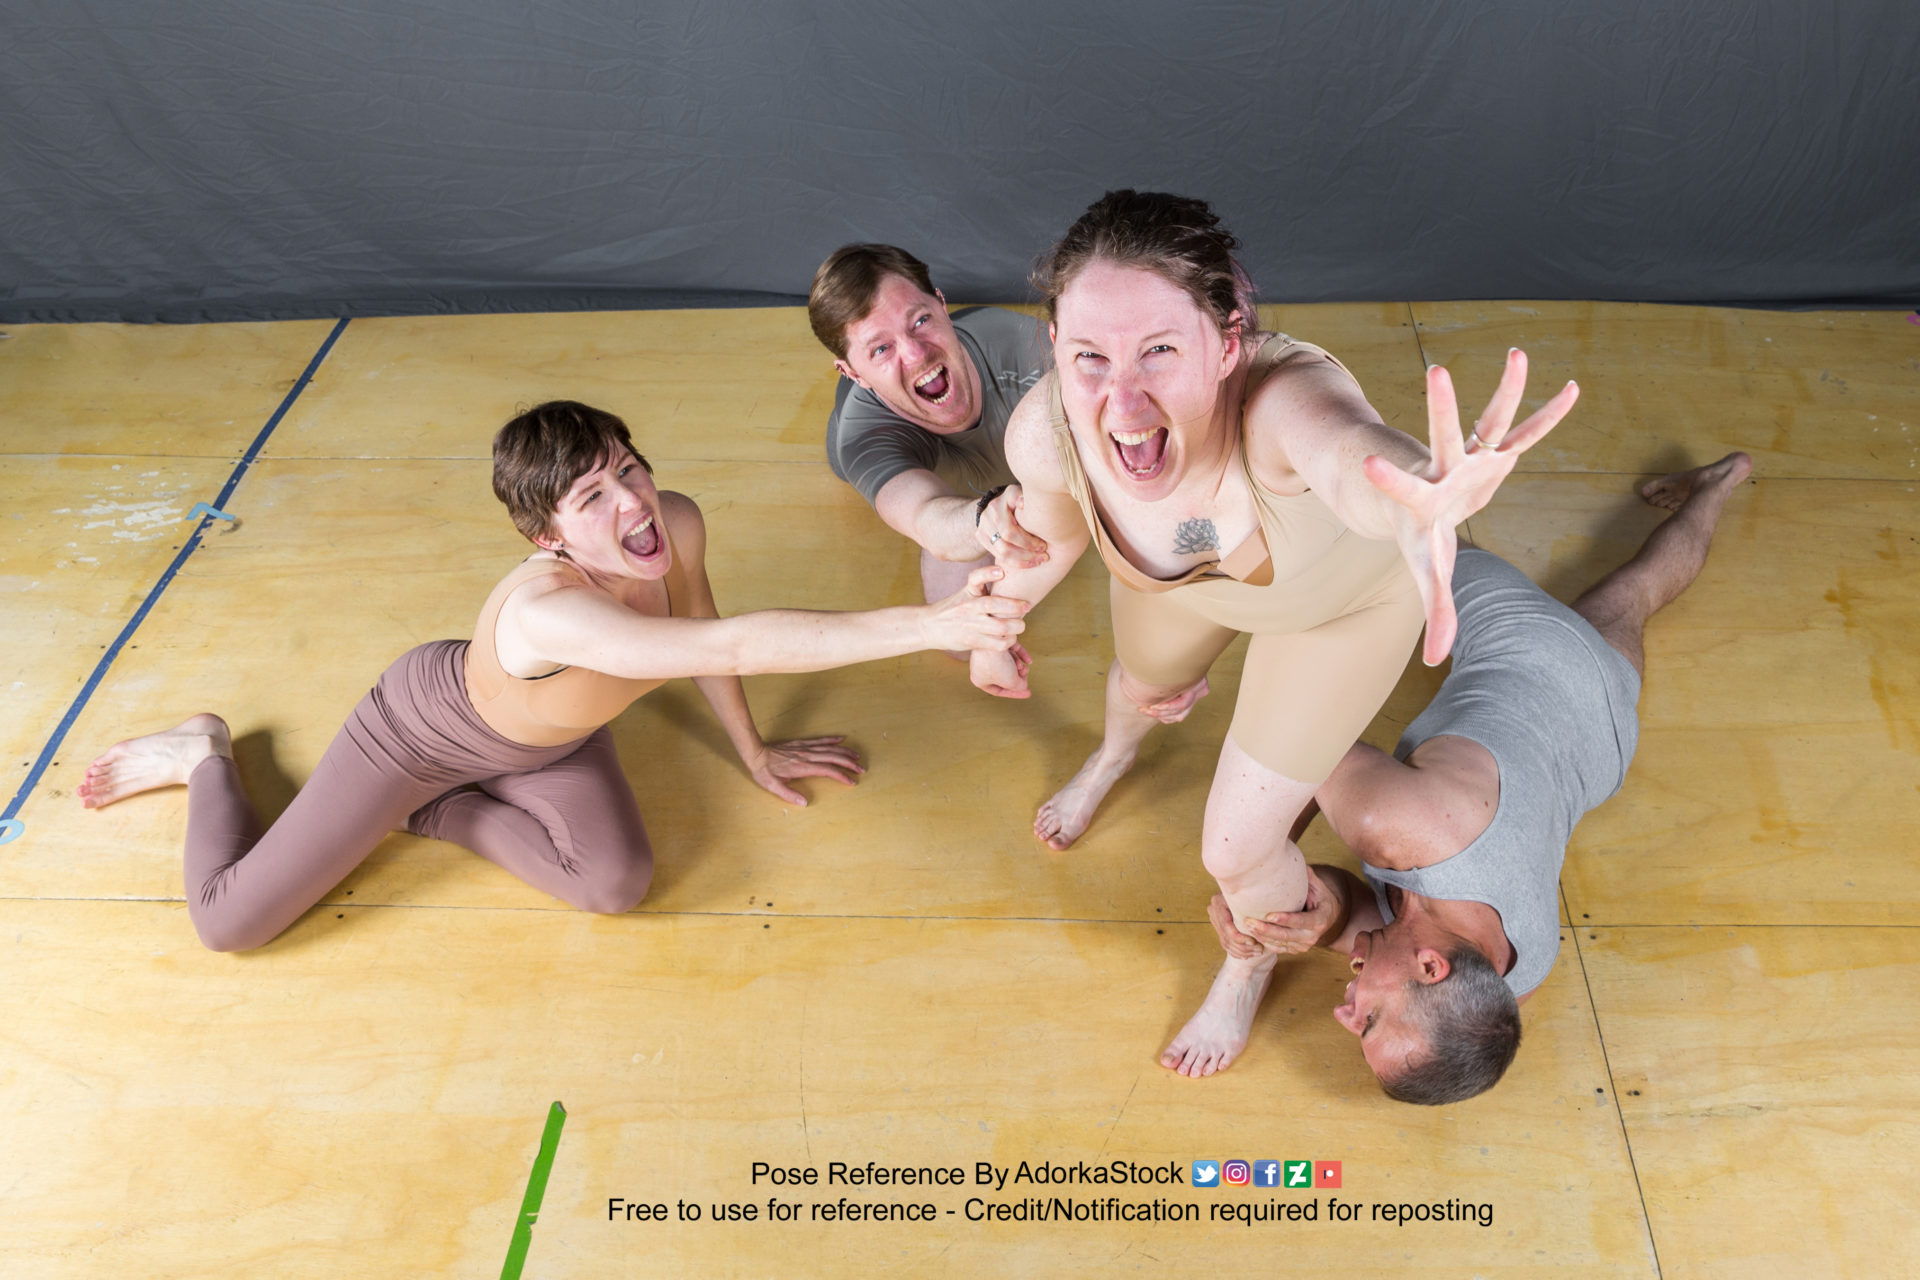 Group pose reference of four people, three on the floor holding onto or biting the fourth who is trying to pull away from them and reaching up towards the camera high above with a hand outstretched and panicked expression.